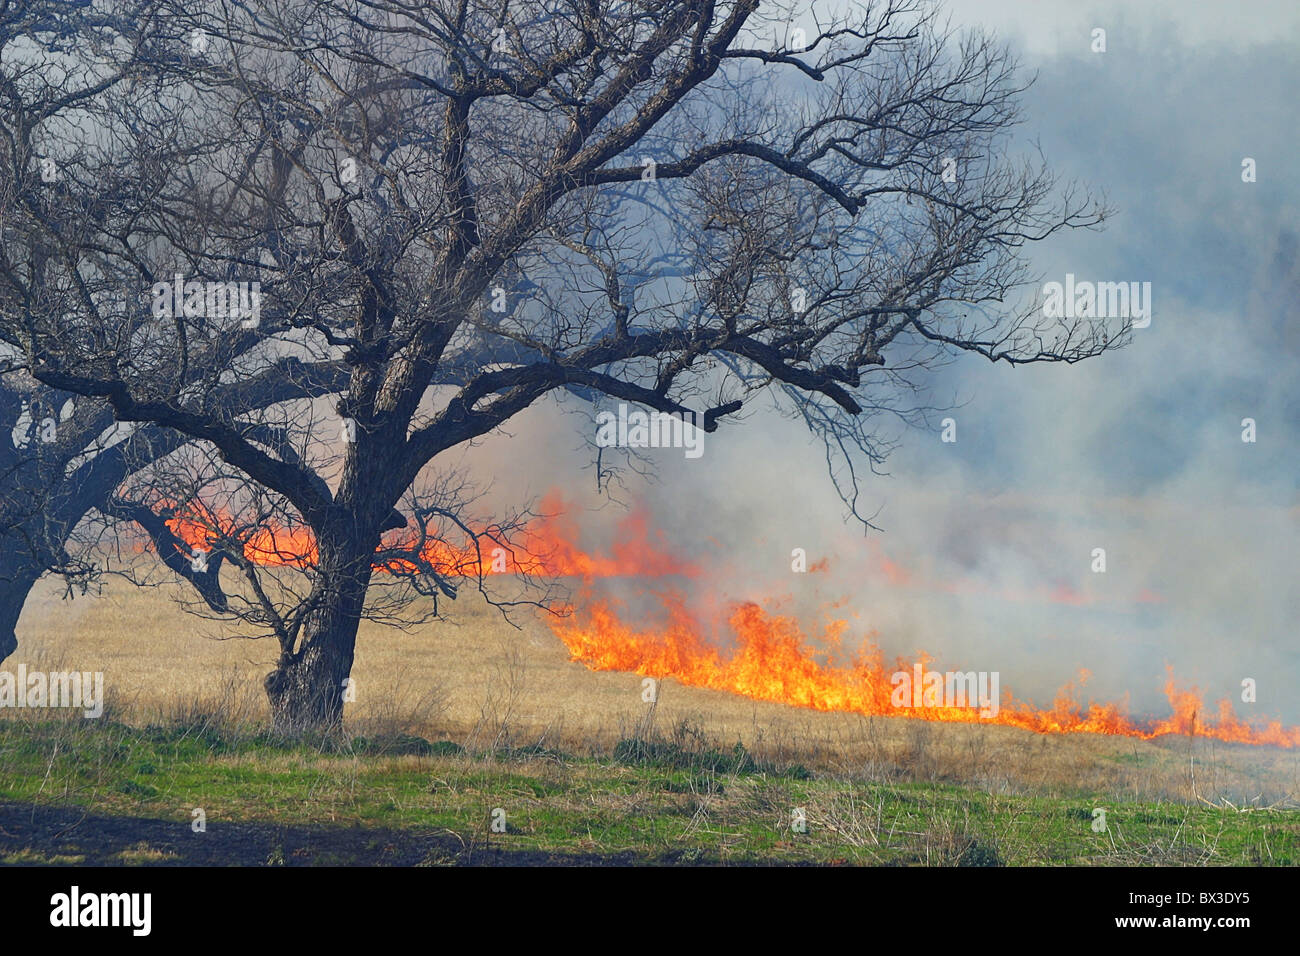 USA America United States North America Texas controlled fire agriculture fields burning grass Stock Photo